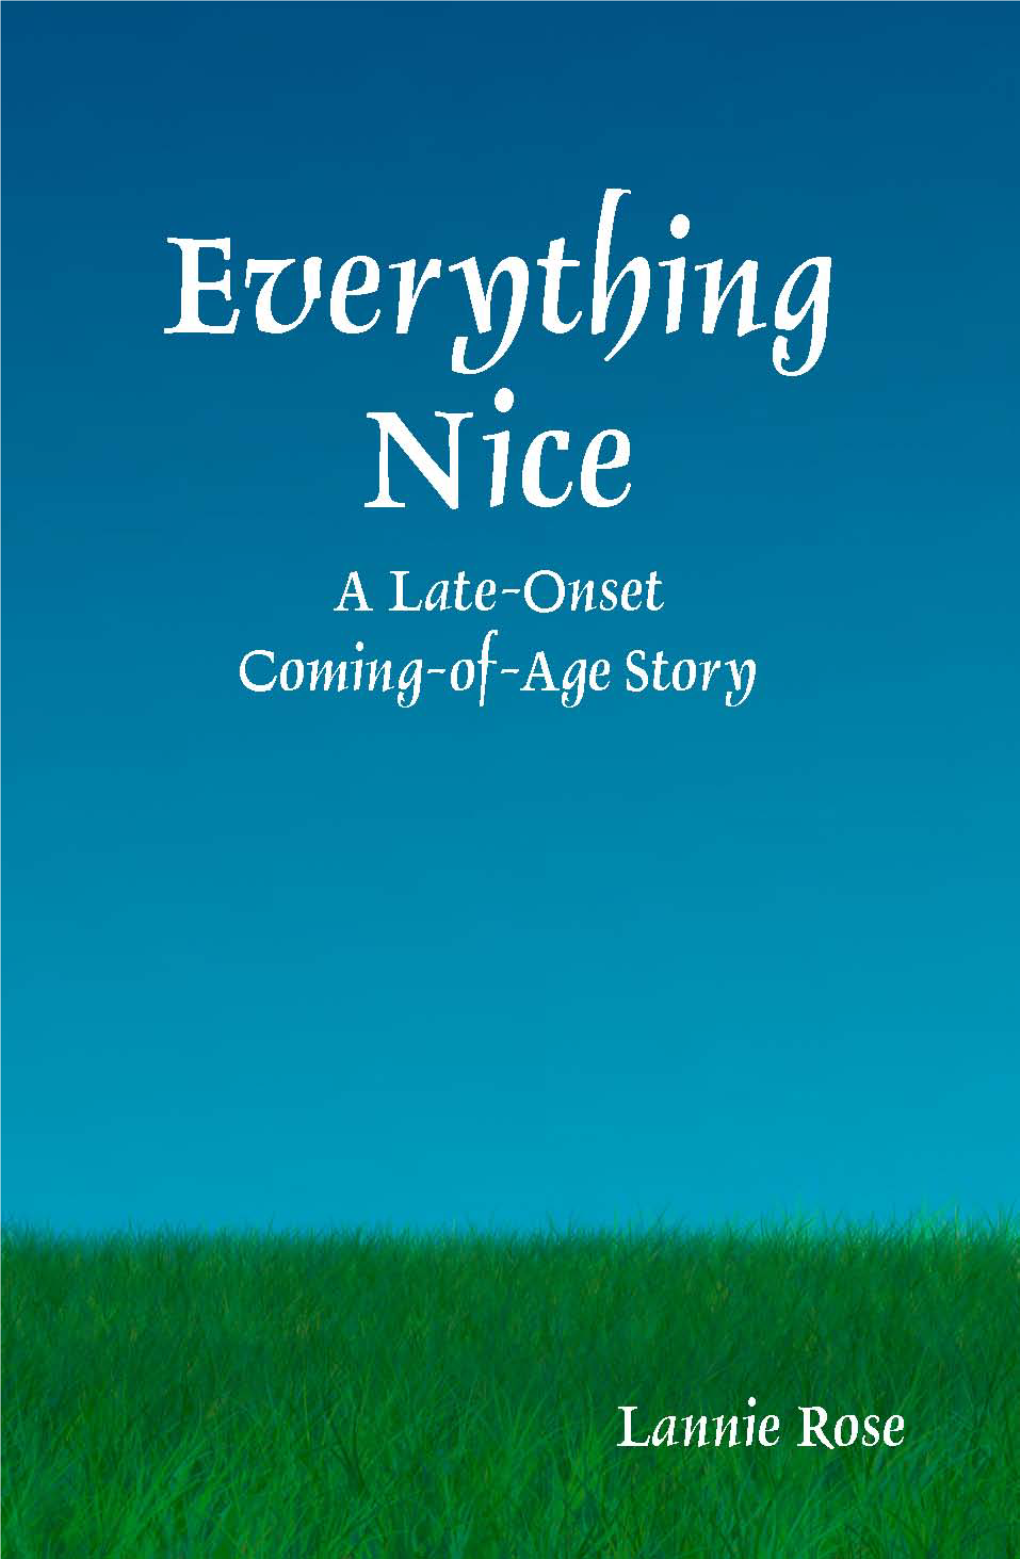 Everything Nice a Late-Onset Coming-Of-Age Story by Lannie Rose